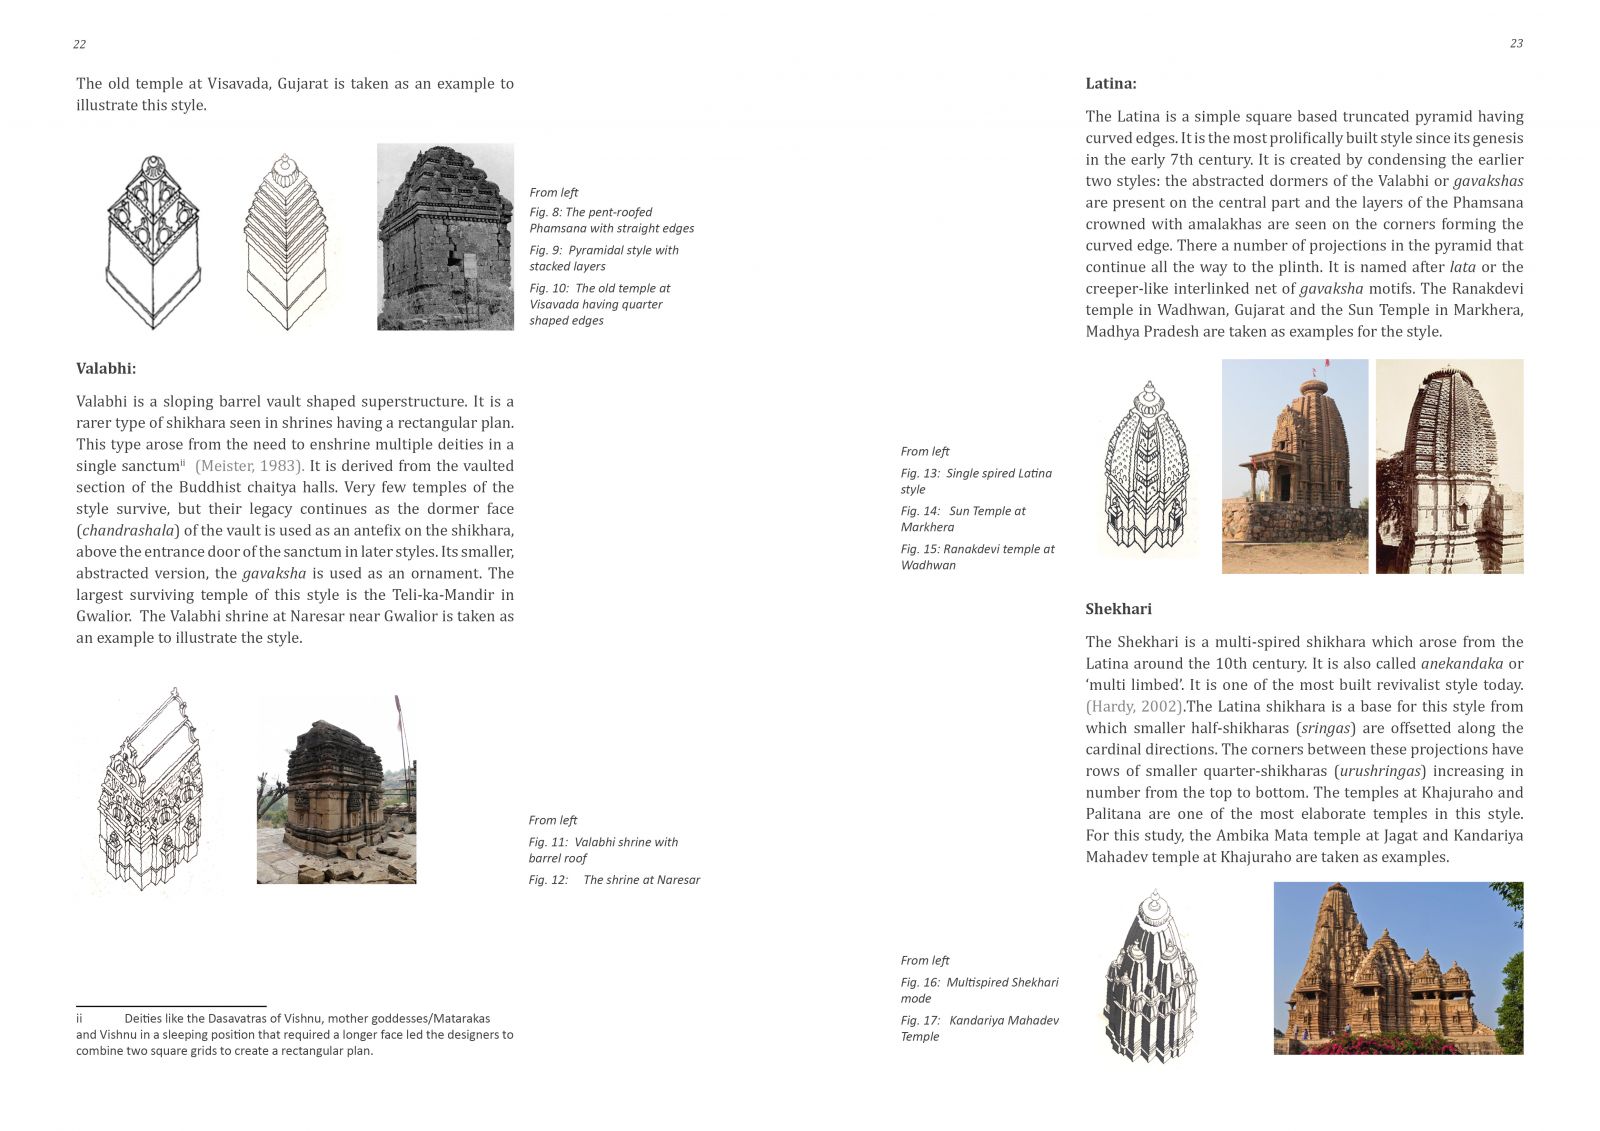 thesis on temple architecture